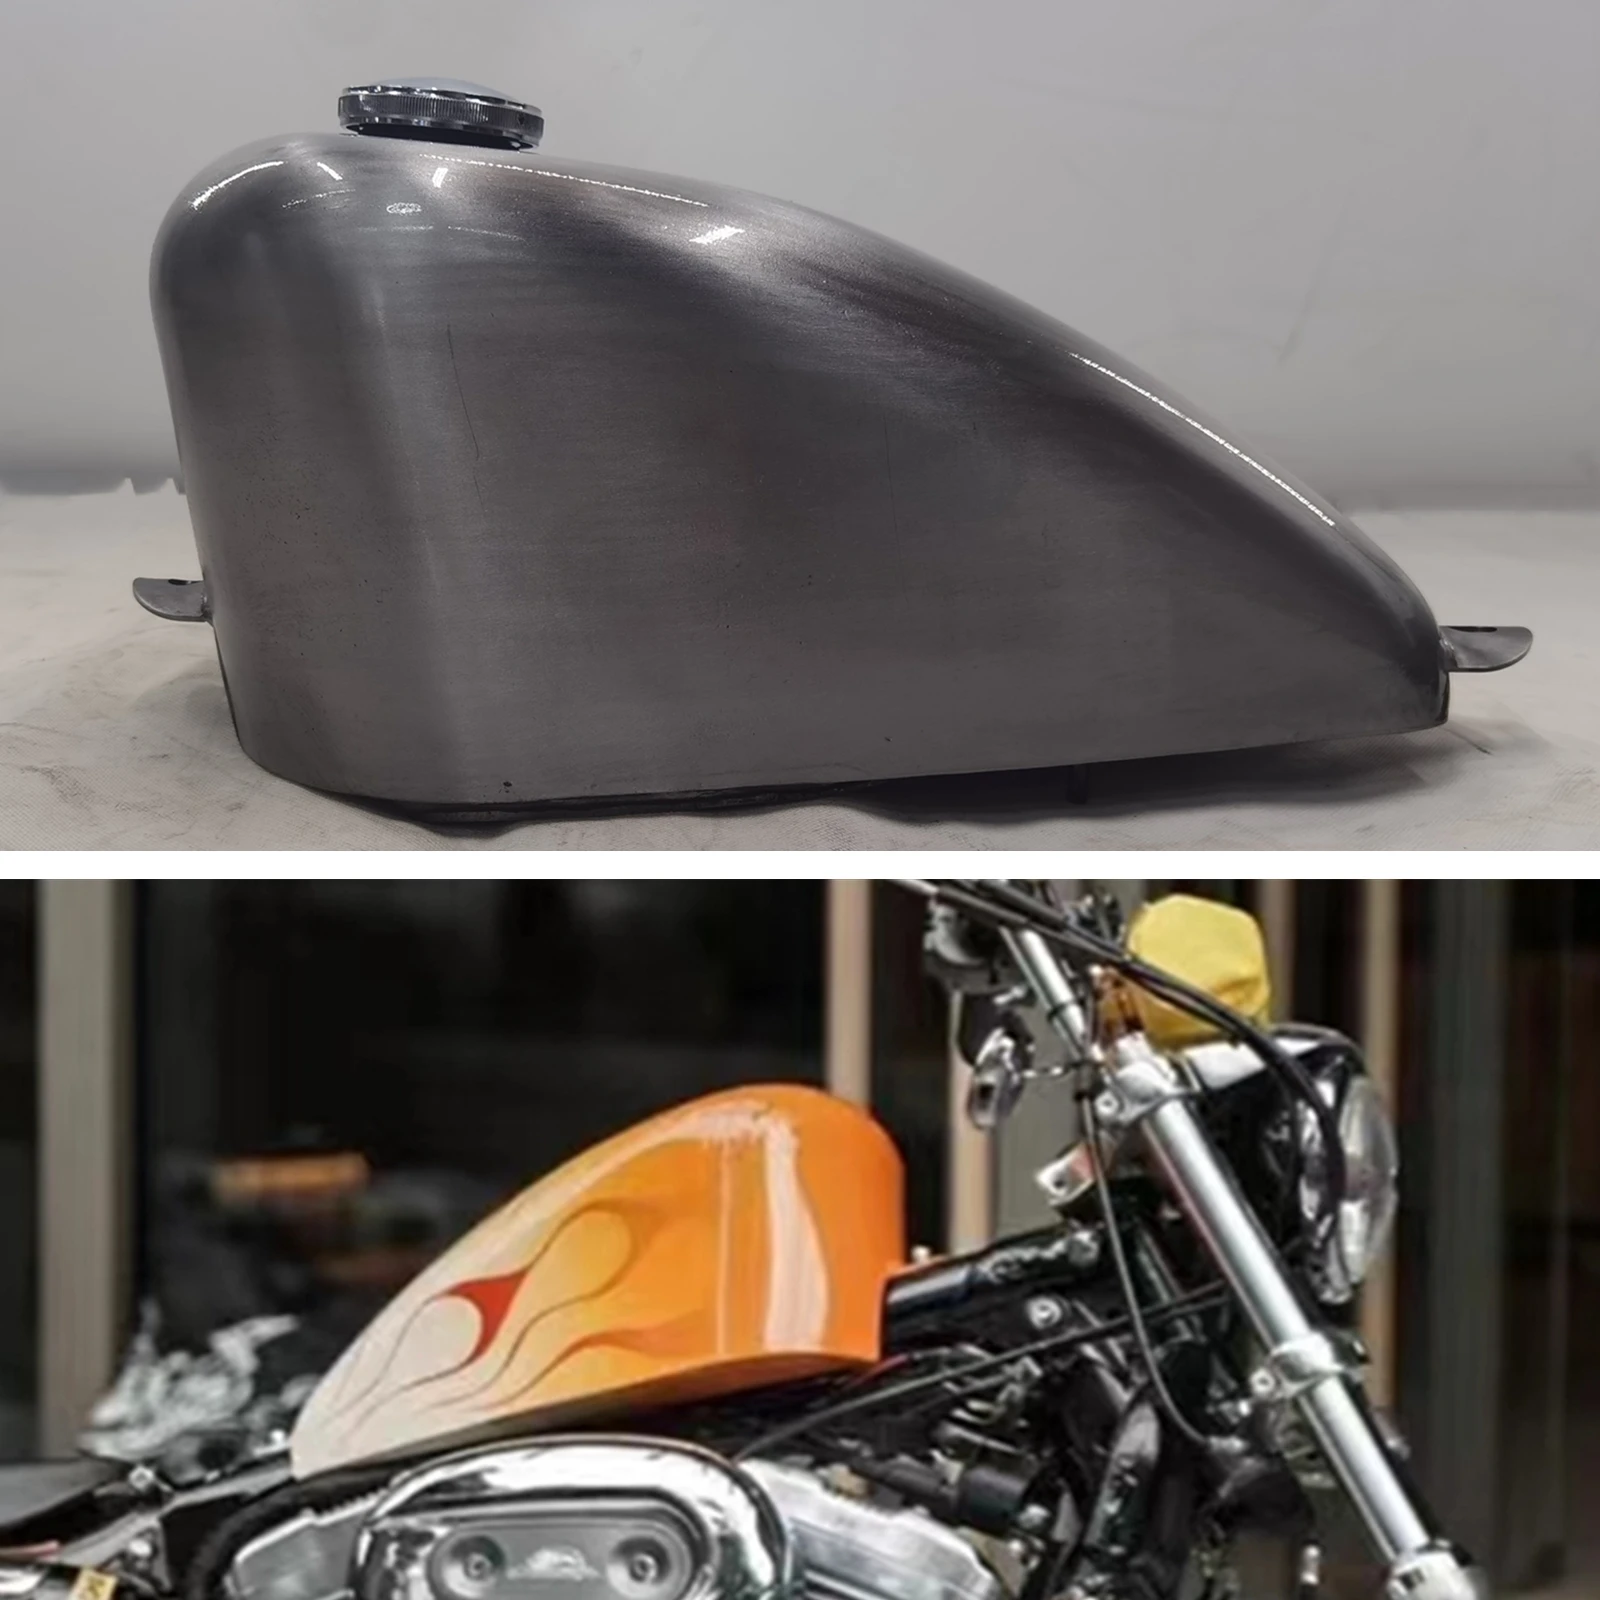 

7 L Motorcycle Petrol Gas Fuel Tank With Gas Cap For Harley Sportster XL1200 883N X48 2006-2022